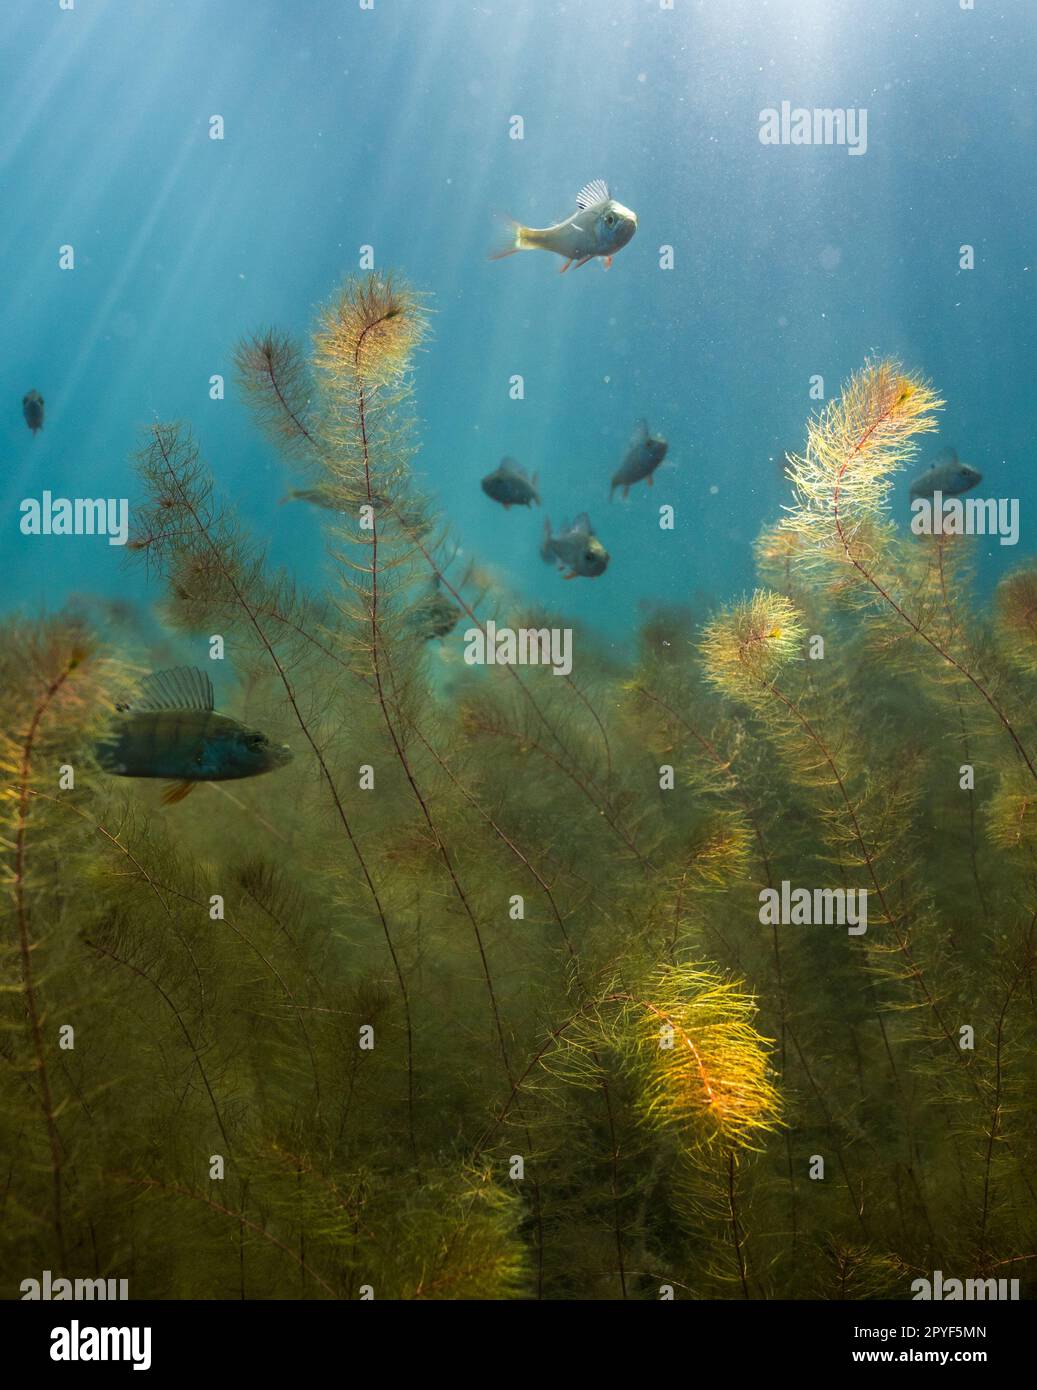 Perch swimming among water-milfoil aquatic plants with natural sunlight Stock Photo